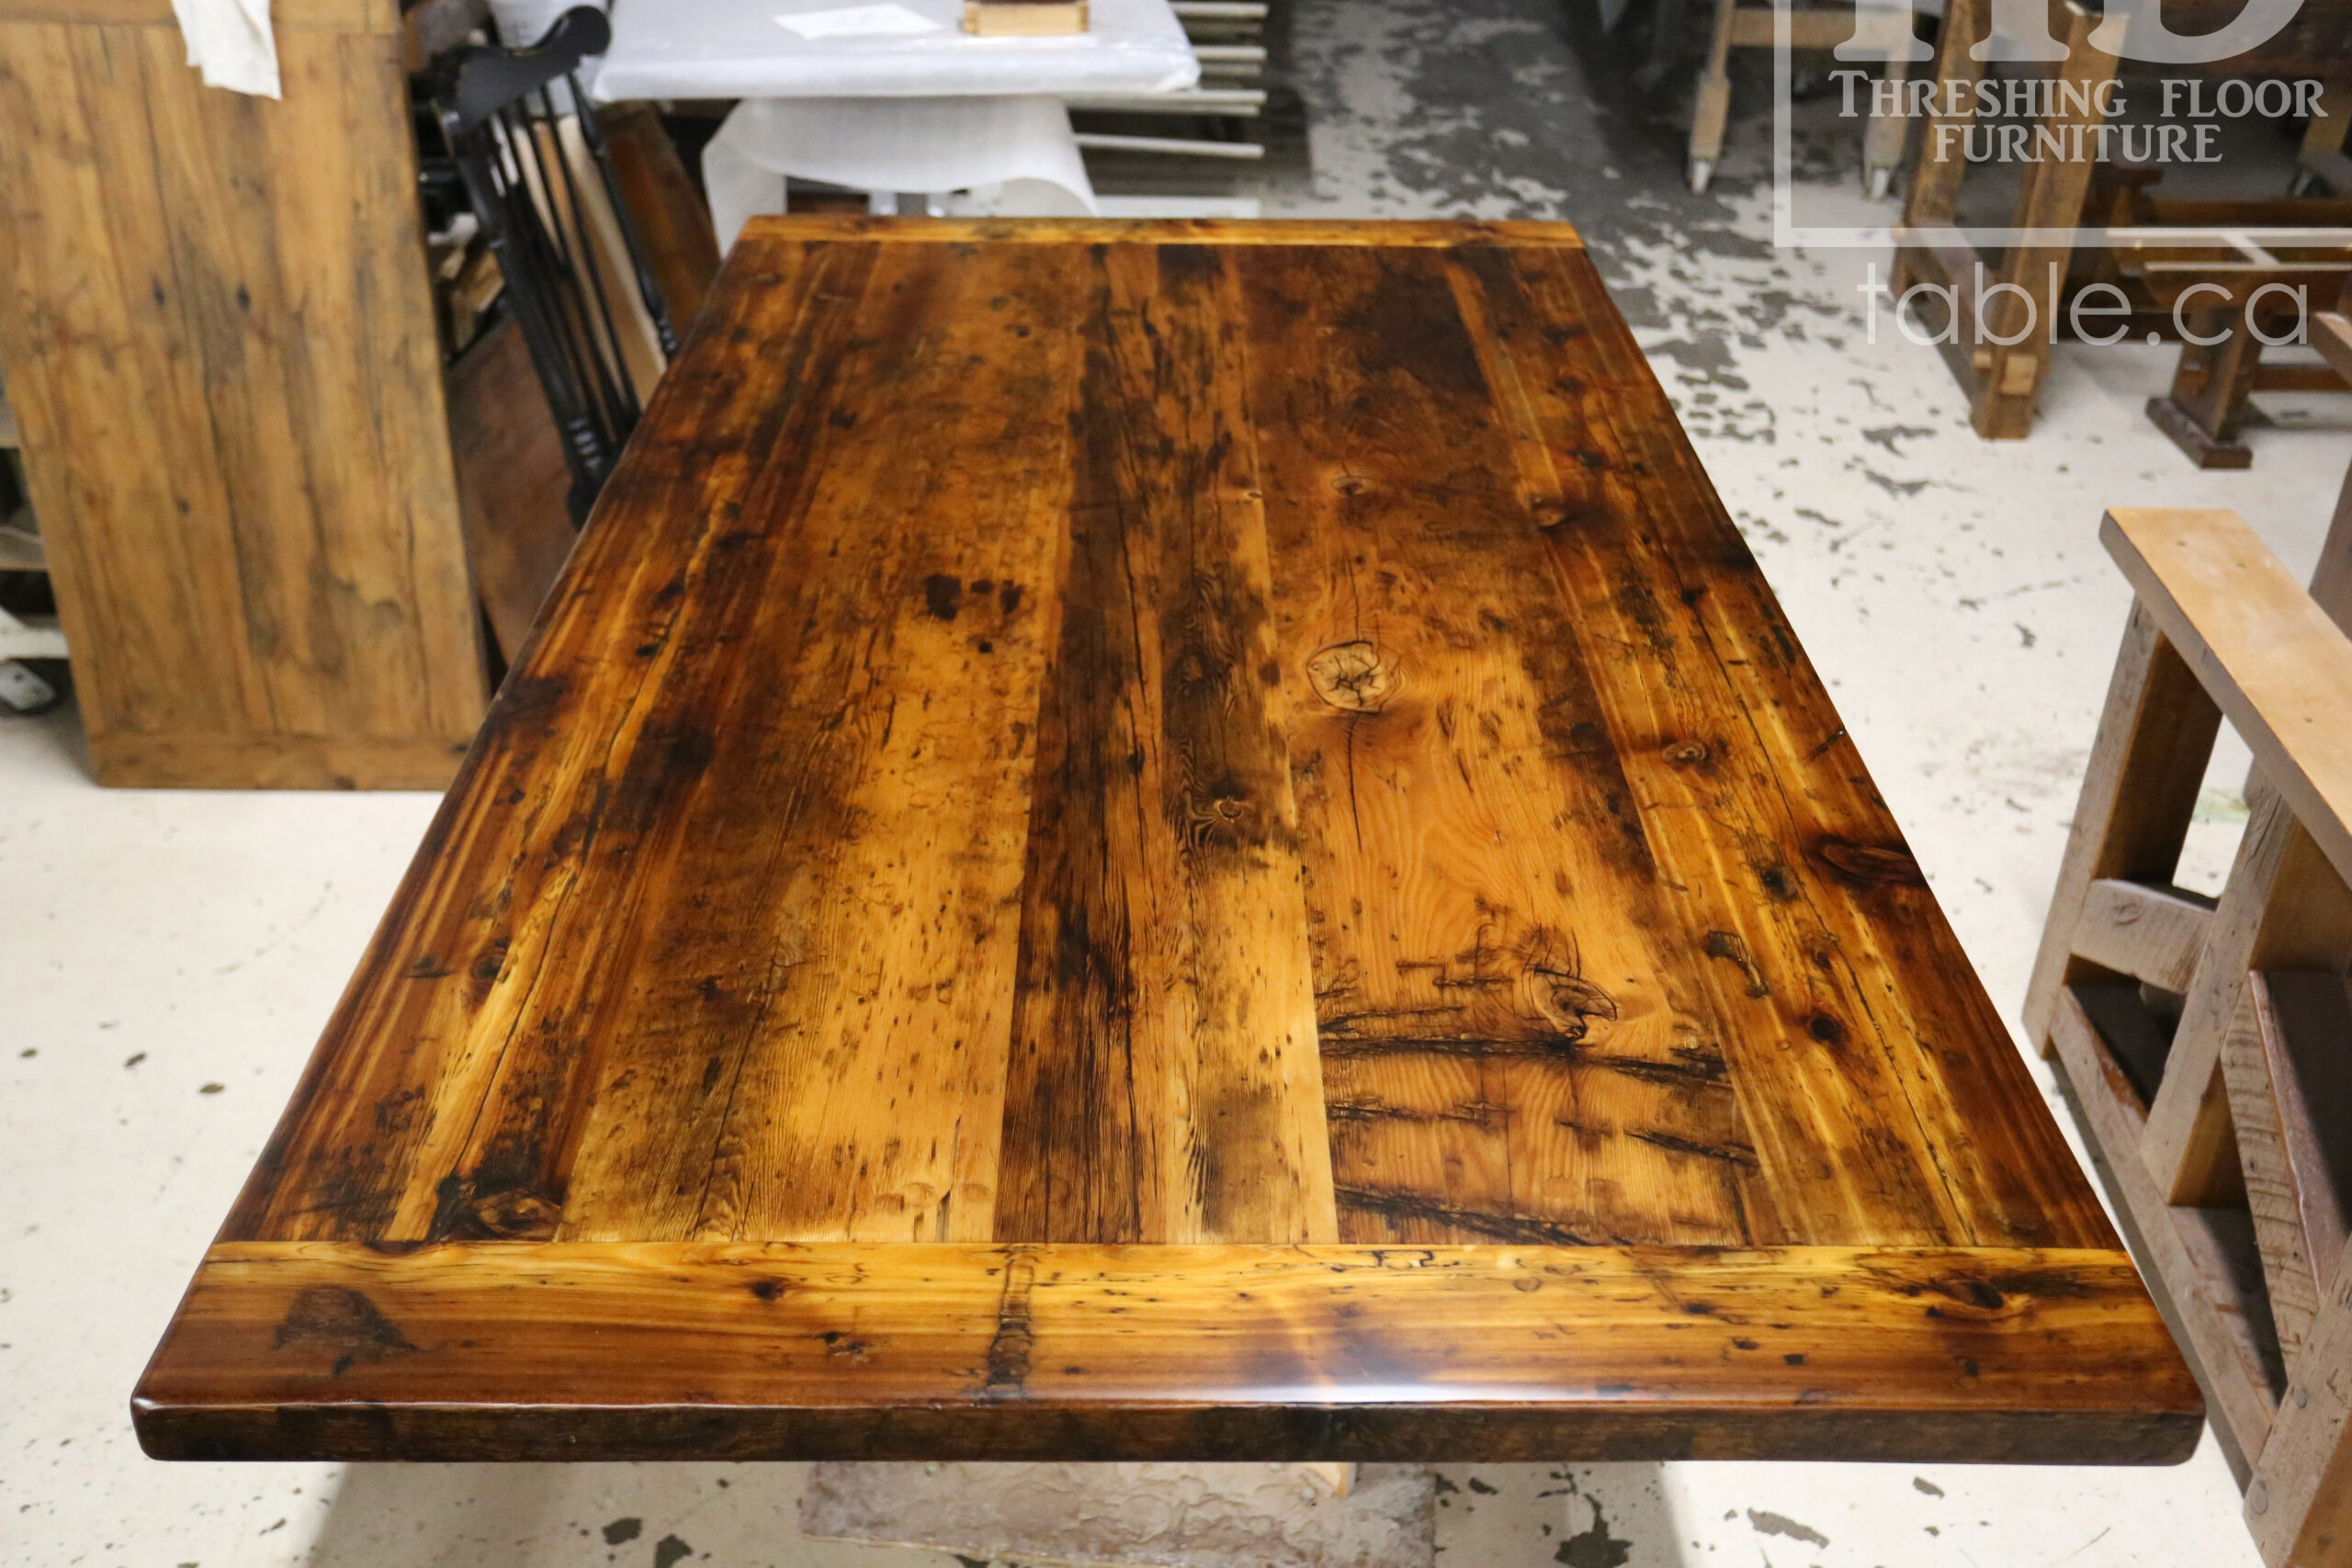 

Restaurant Table Tops made from Reclaimed Ontario Barnwood by HD Threshing Floor Furniture / www.table.ca